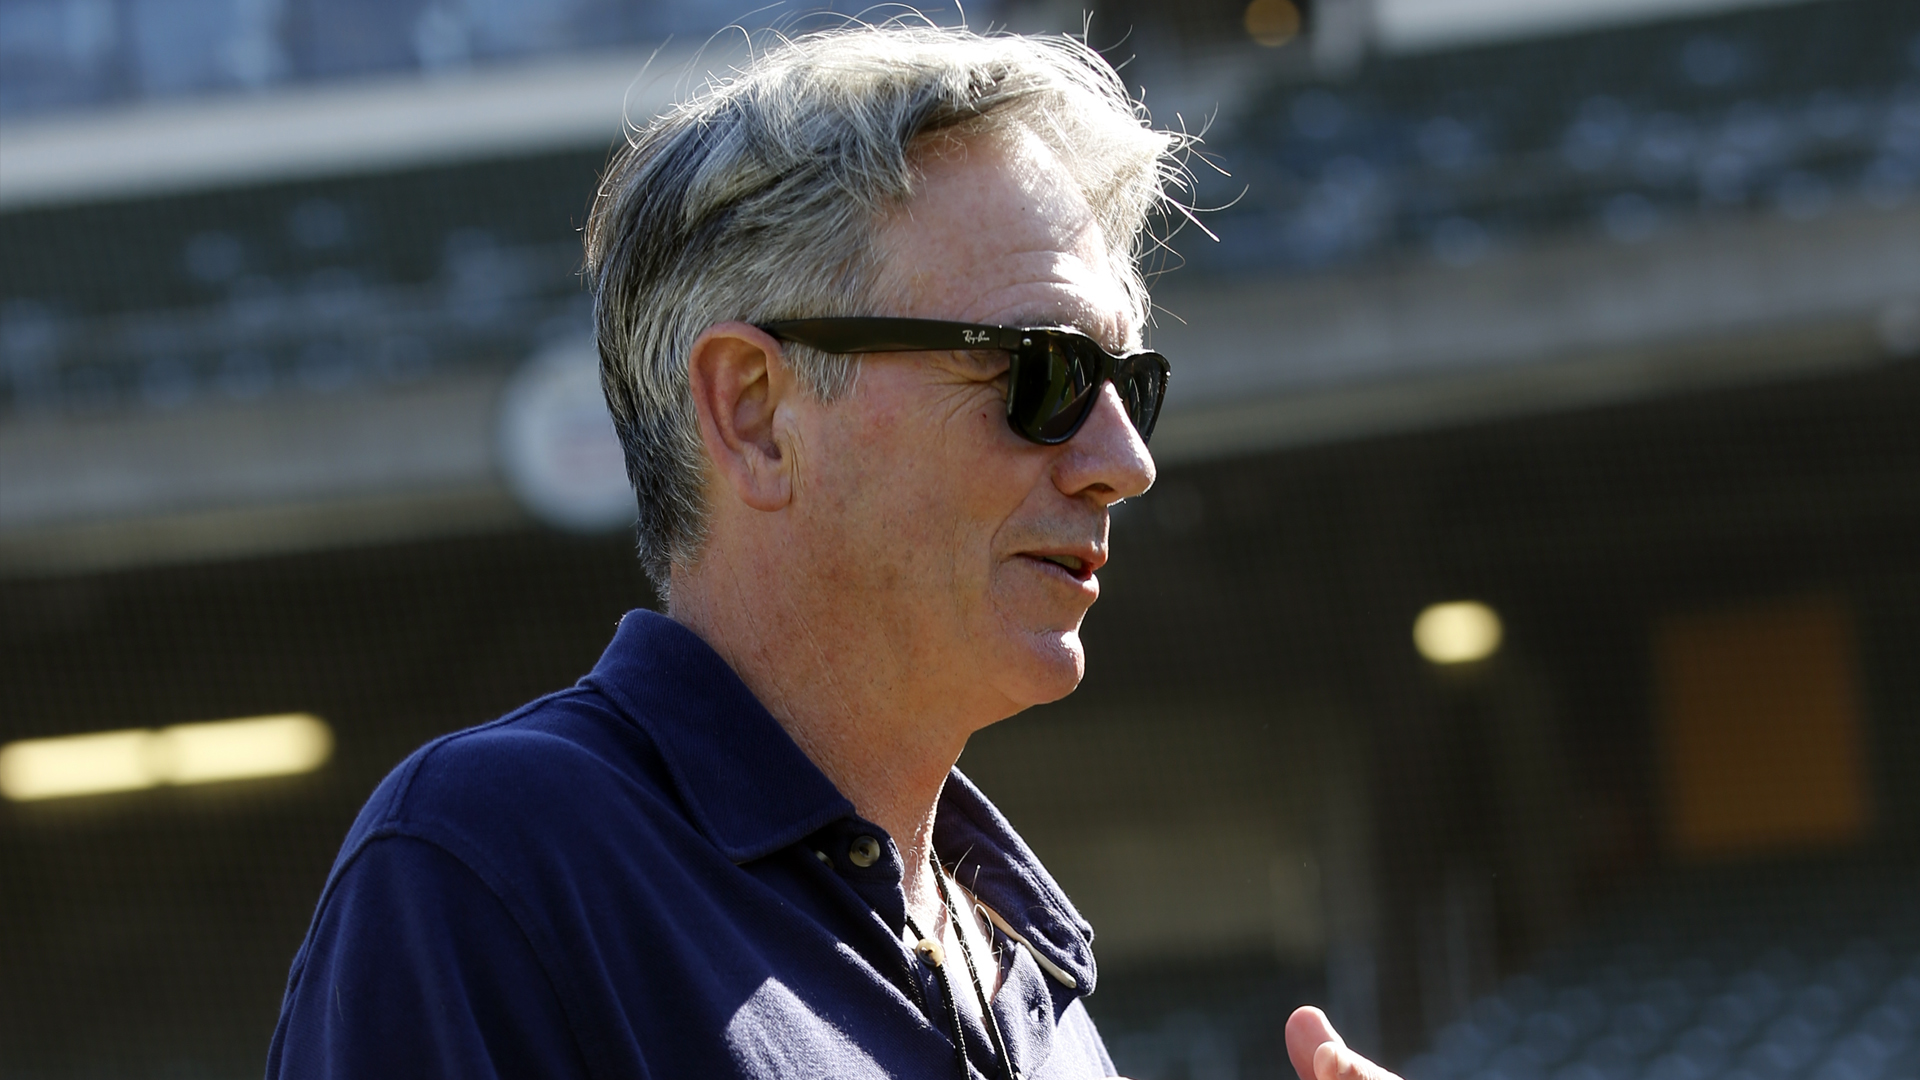 Billy Beane Reportedly Expected to Leave A's After 30 Years in OAK